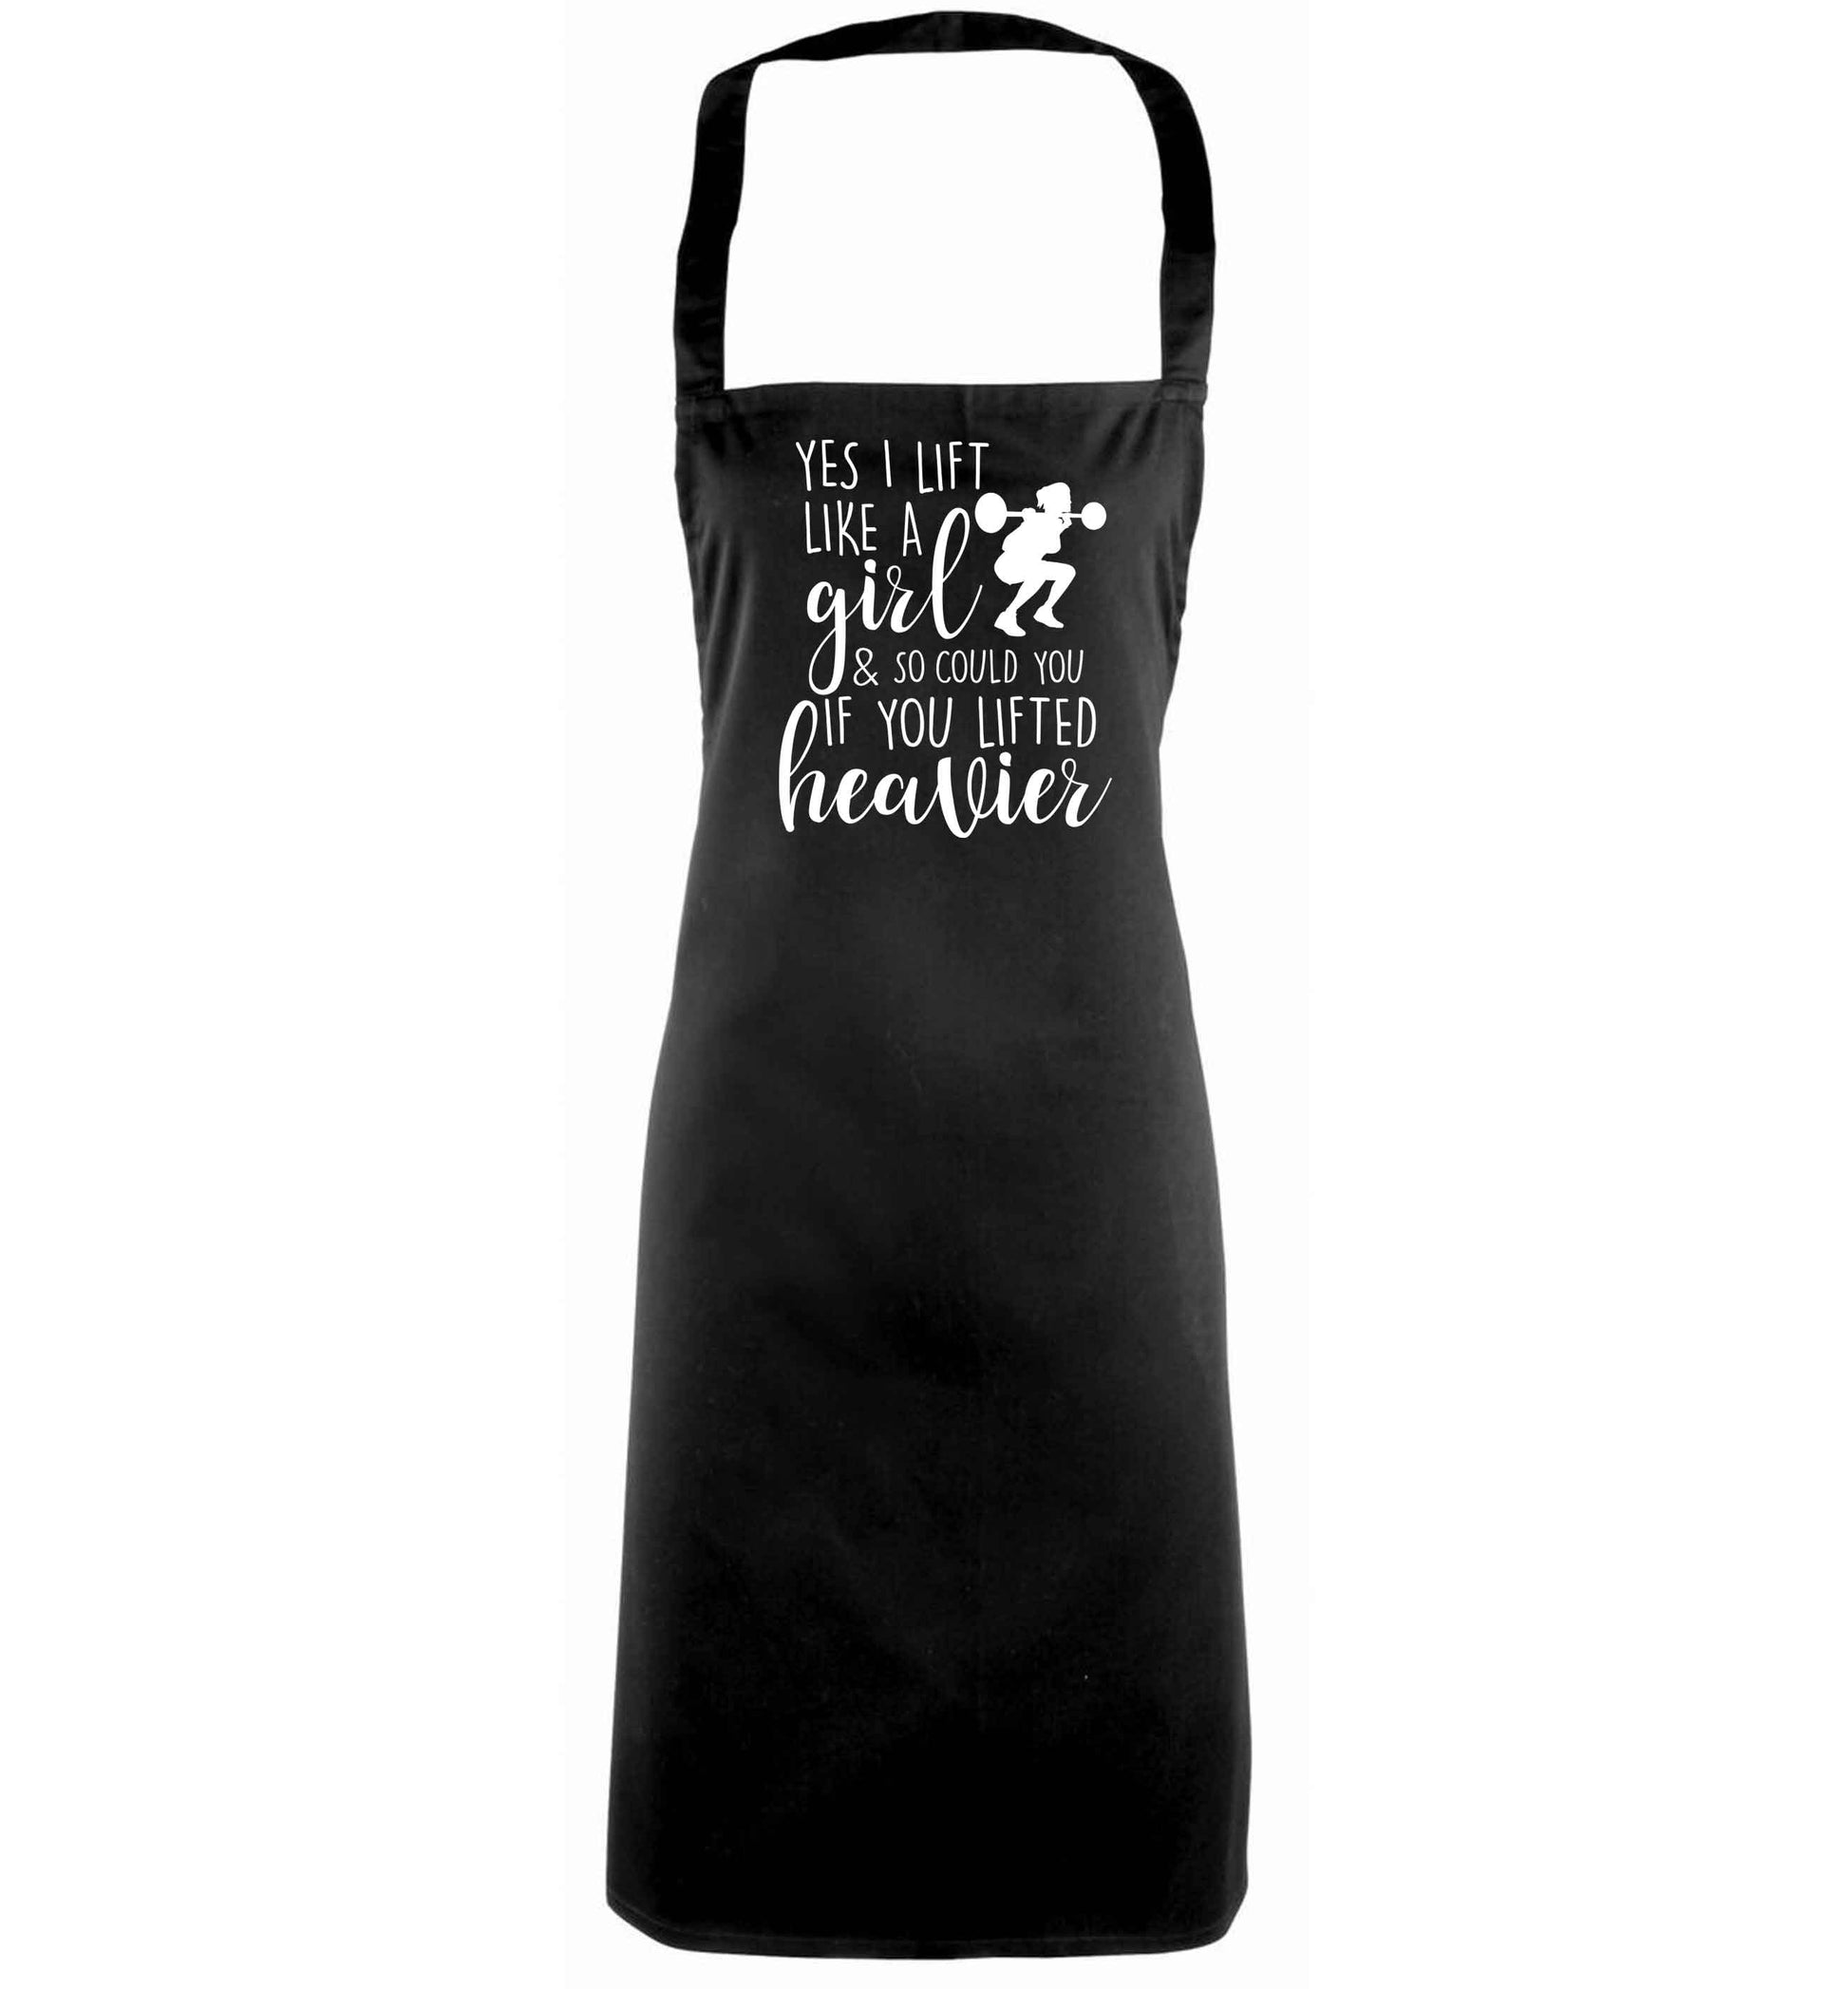 Yes I lift like a girl and so could you if you lifted heavier black apron